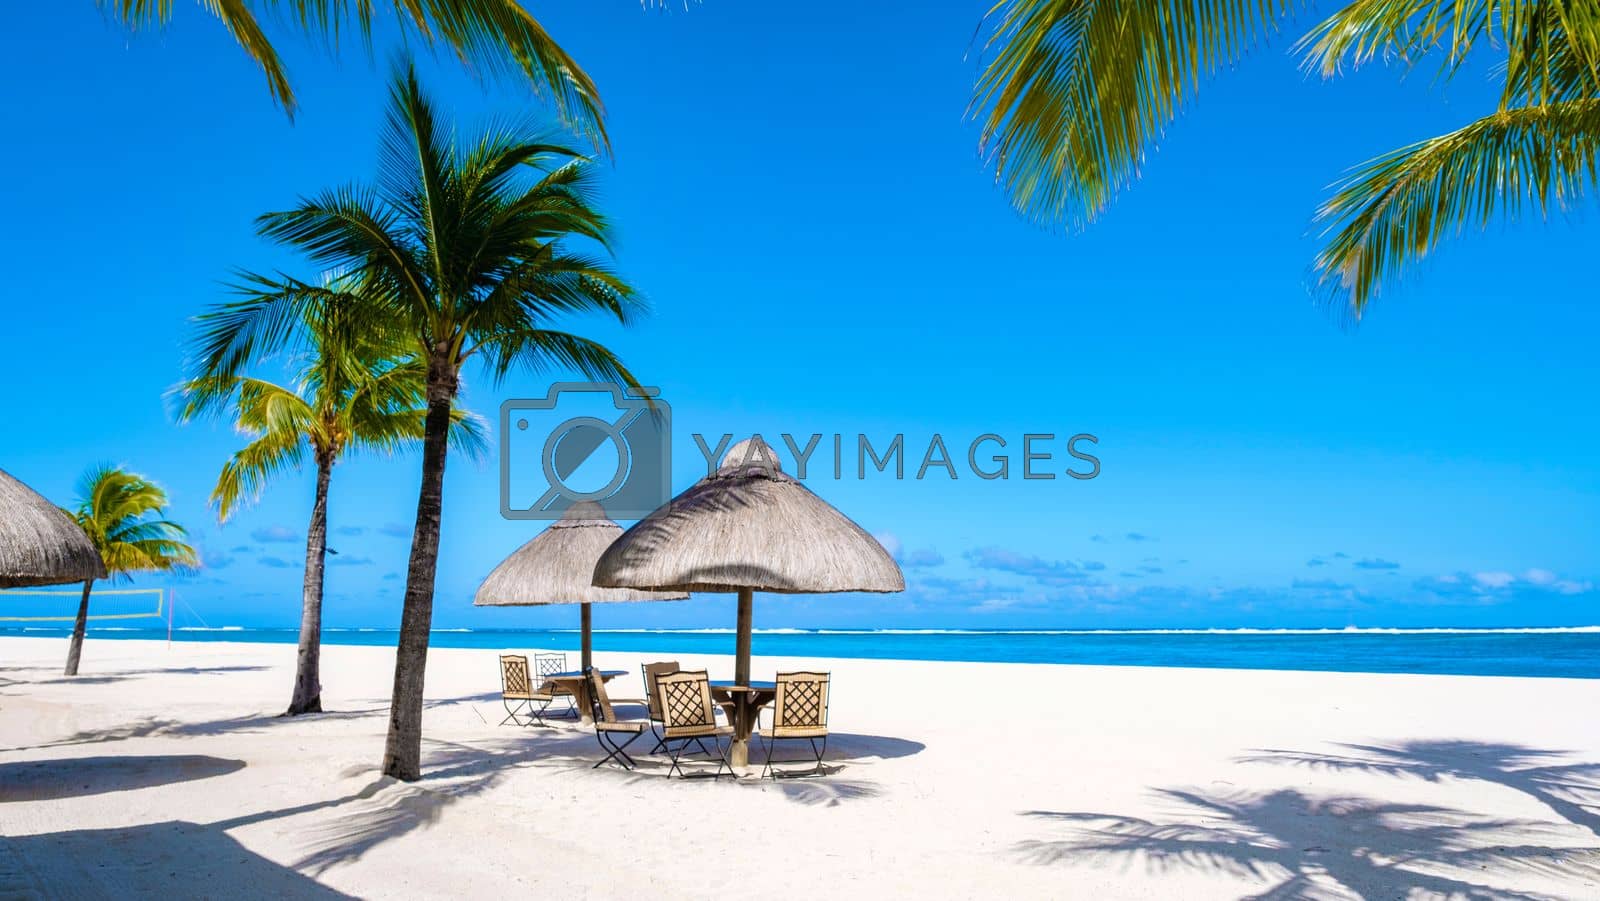 Royalty free image of Tropical beach with palm trees and white sand blue ocean and beach beds with umbrella,Sun chairs and parasol under a palm tree at a tropical beac, Le Morne beach Mauritius by fokkebok